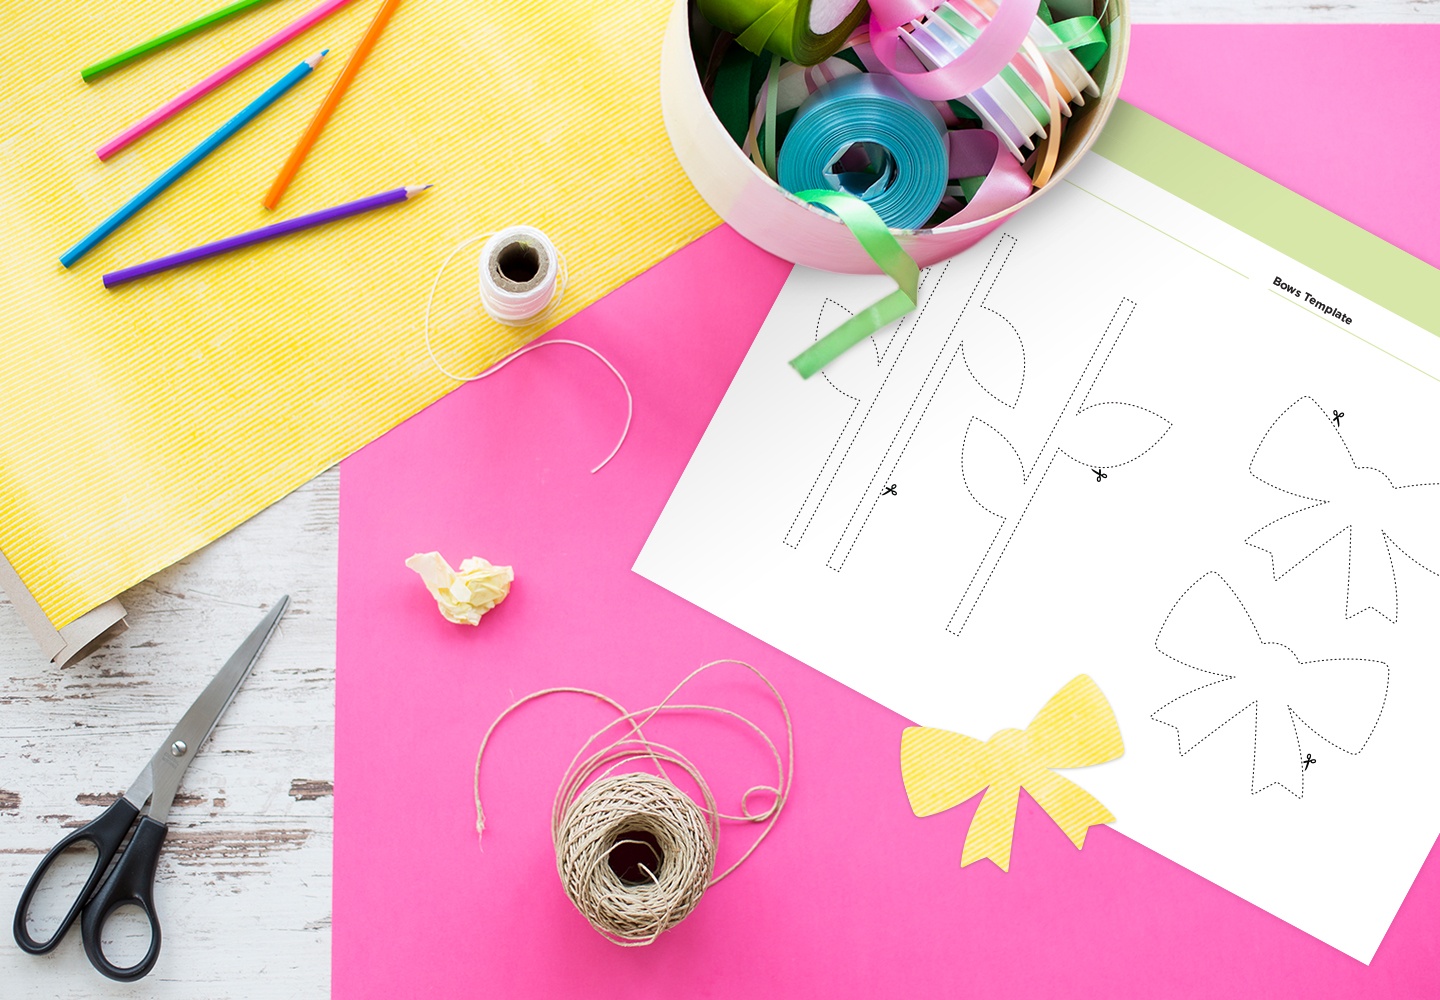 Fun Flower Crafts For Kids Of All Ages!